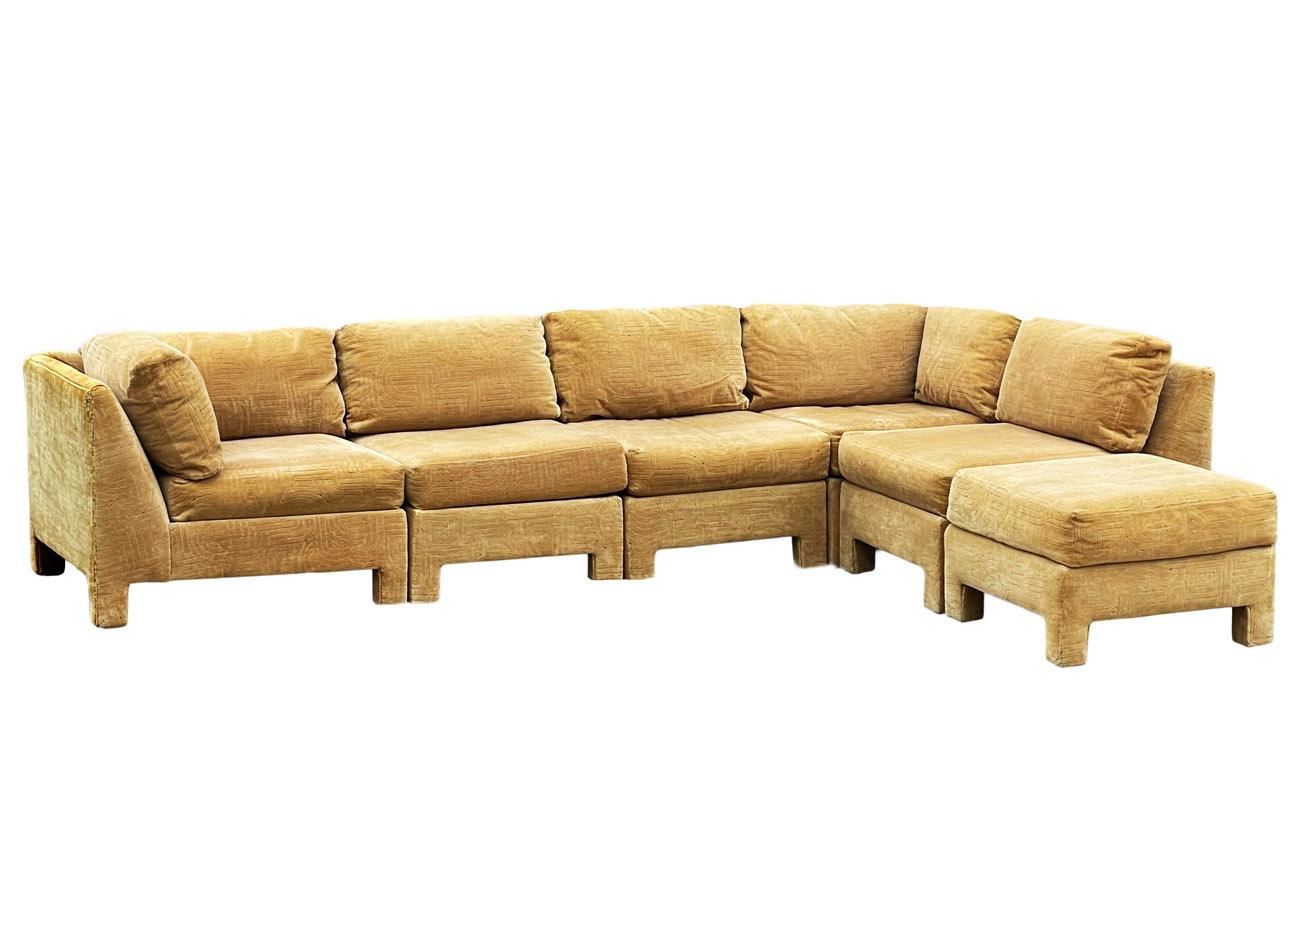 American Mid-Century Modern Sectional or Modular Parsons Sofa Set by Selig with Ottoman